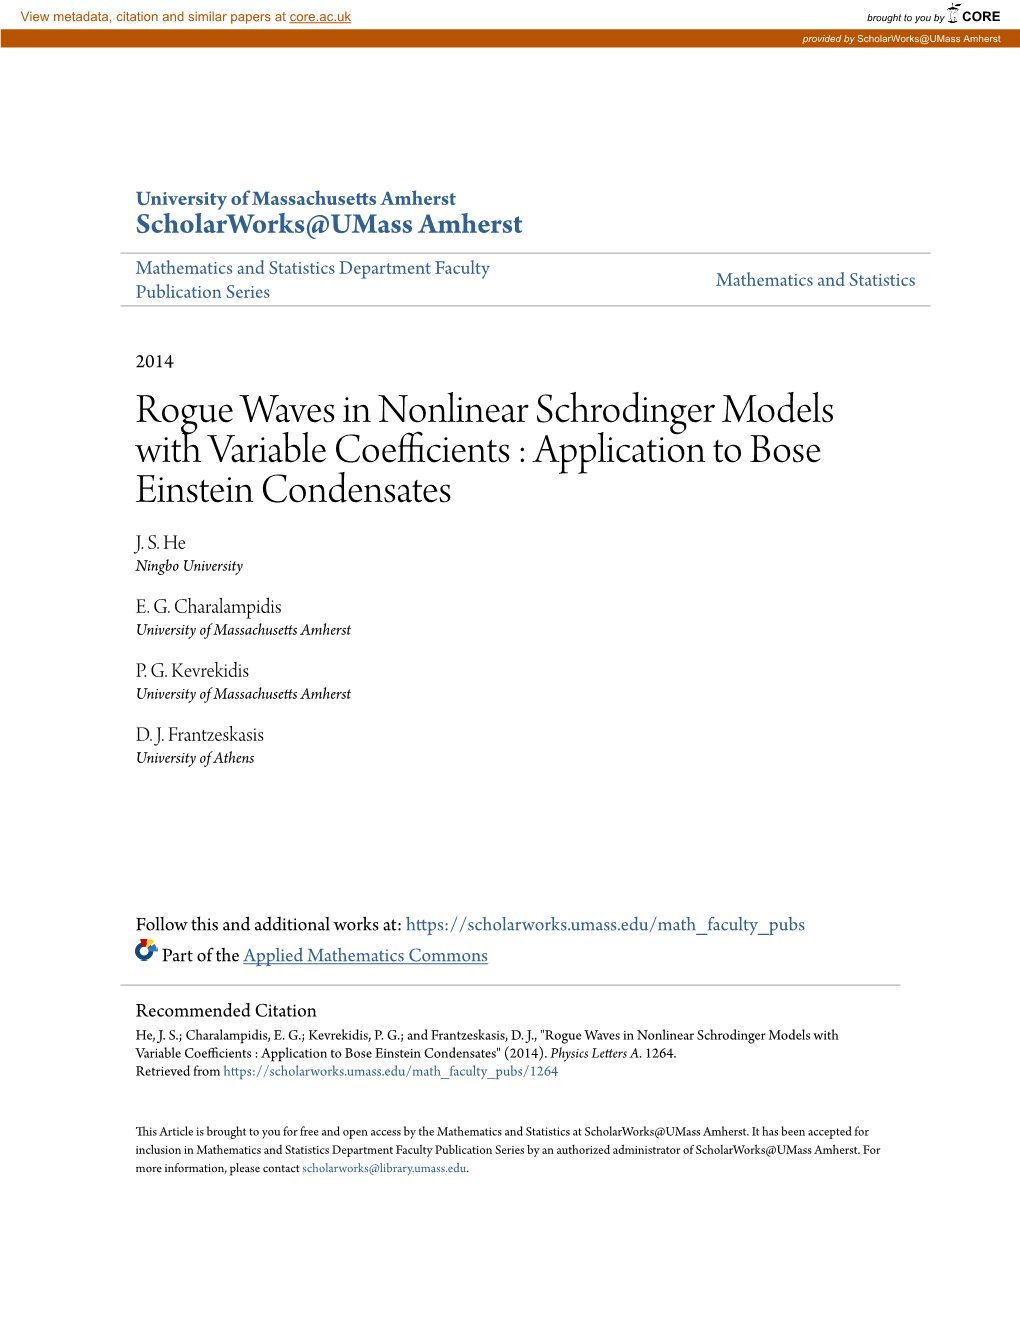 Rogue Waves in Nonlinear Schrodinger Models with Variable Coefficients : Application to Bose Einstein Condensates J